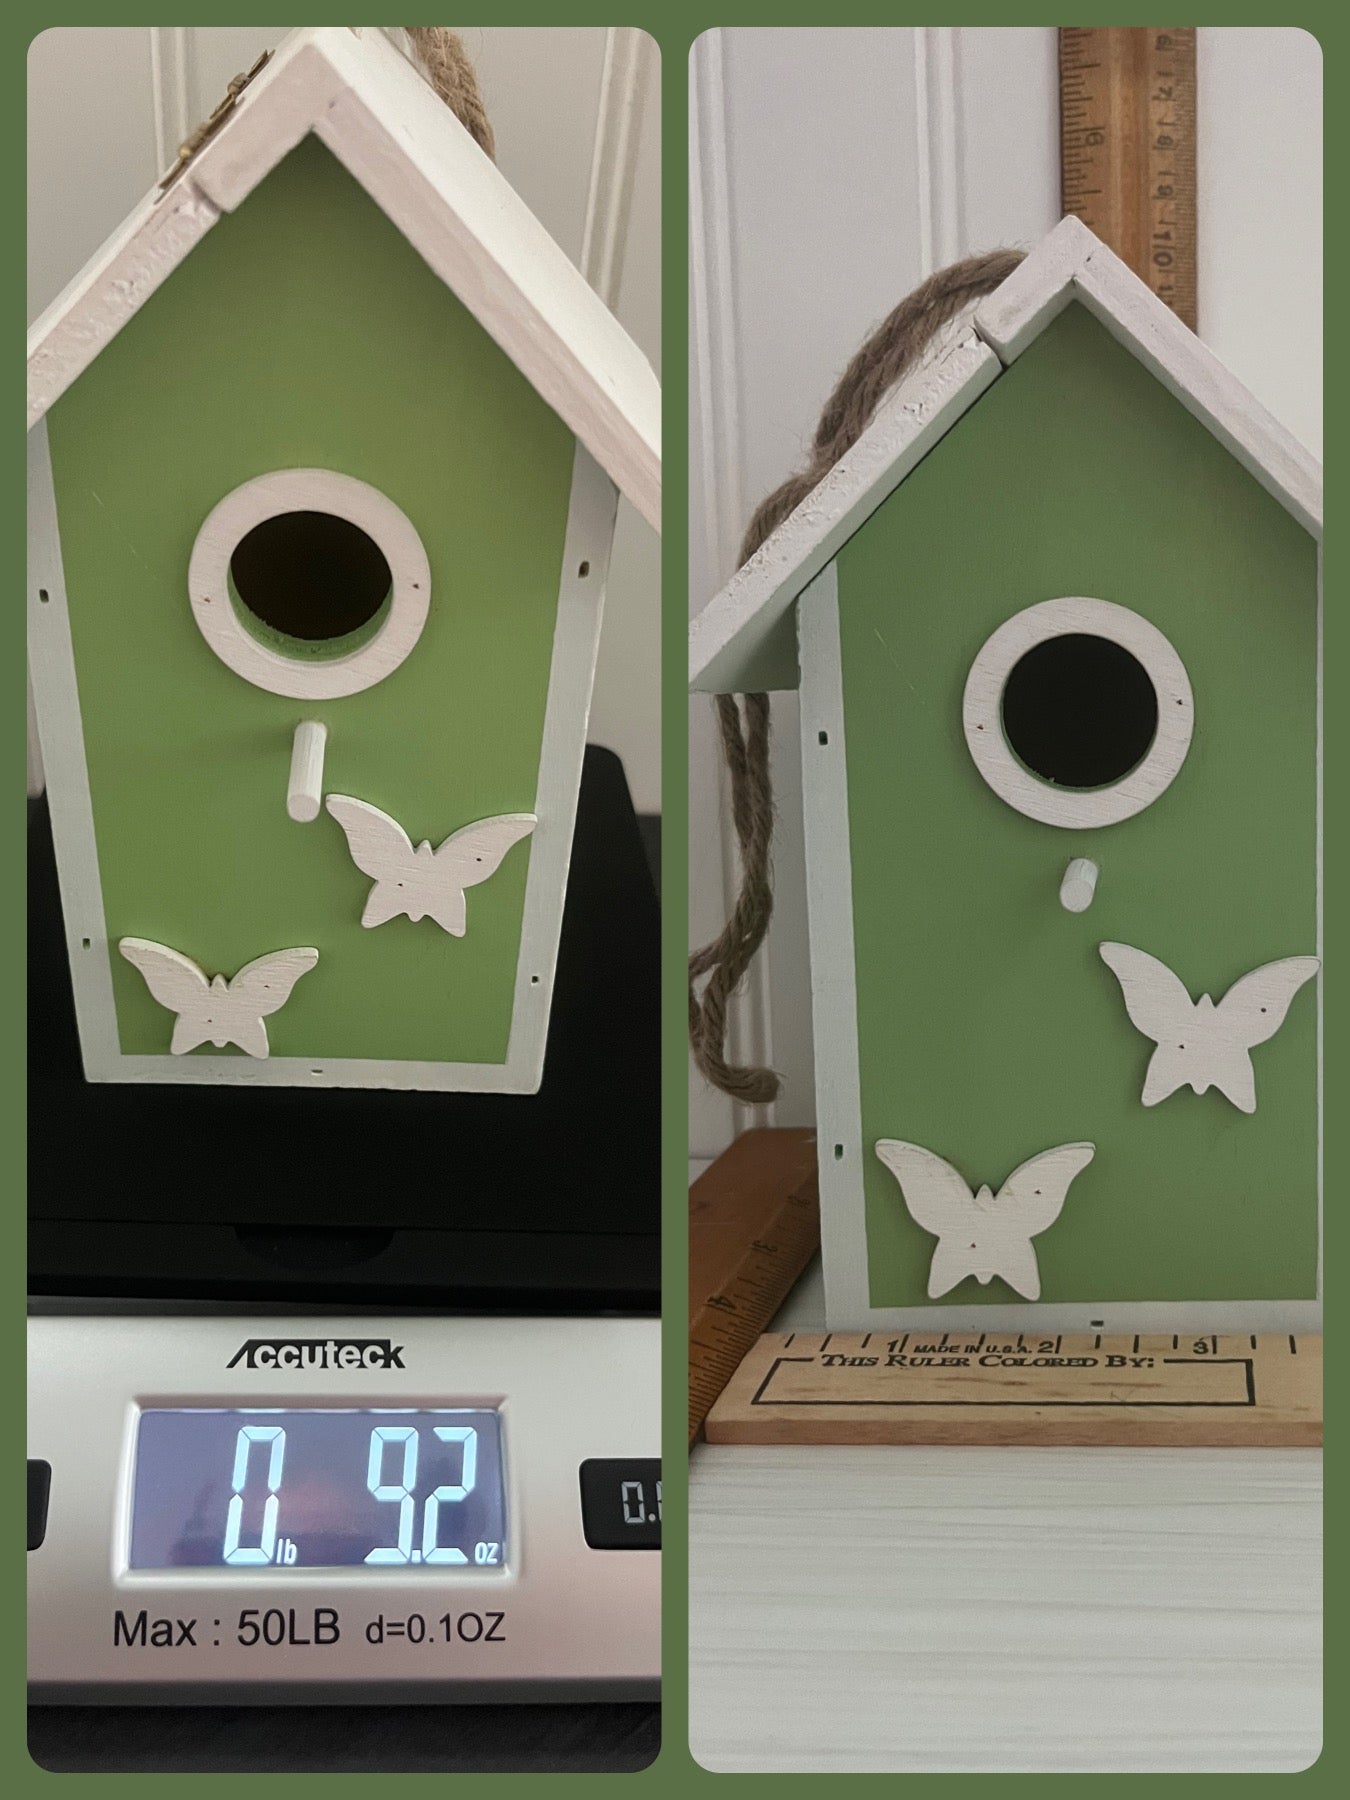 Vintage Style Adorable Small Green Birdhouse with butterfly appliqués